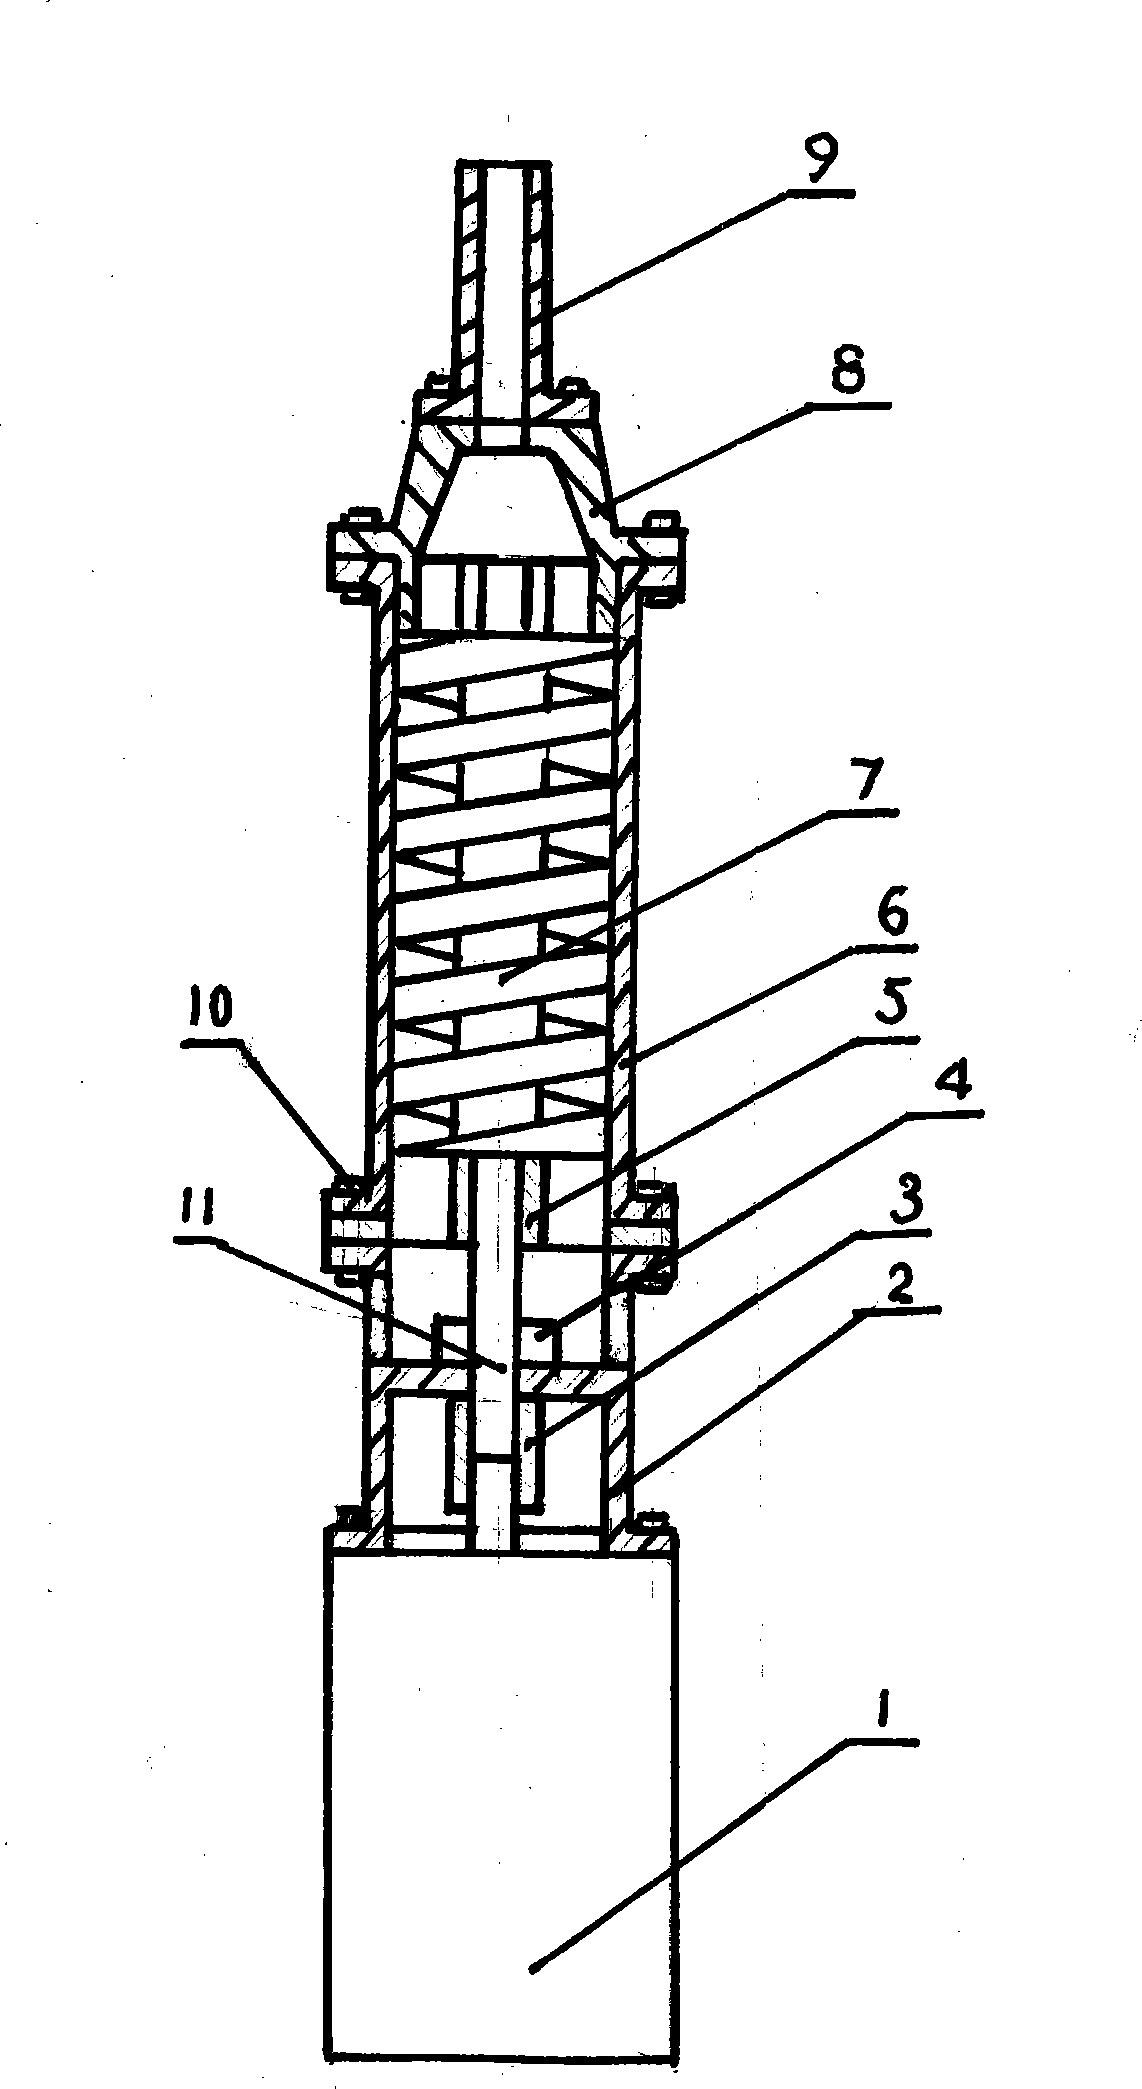 Single-rod multi-head transecting spiral submersible pump